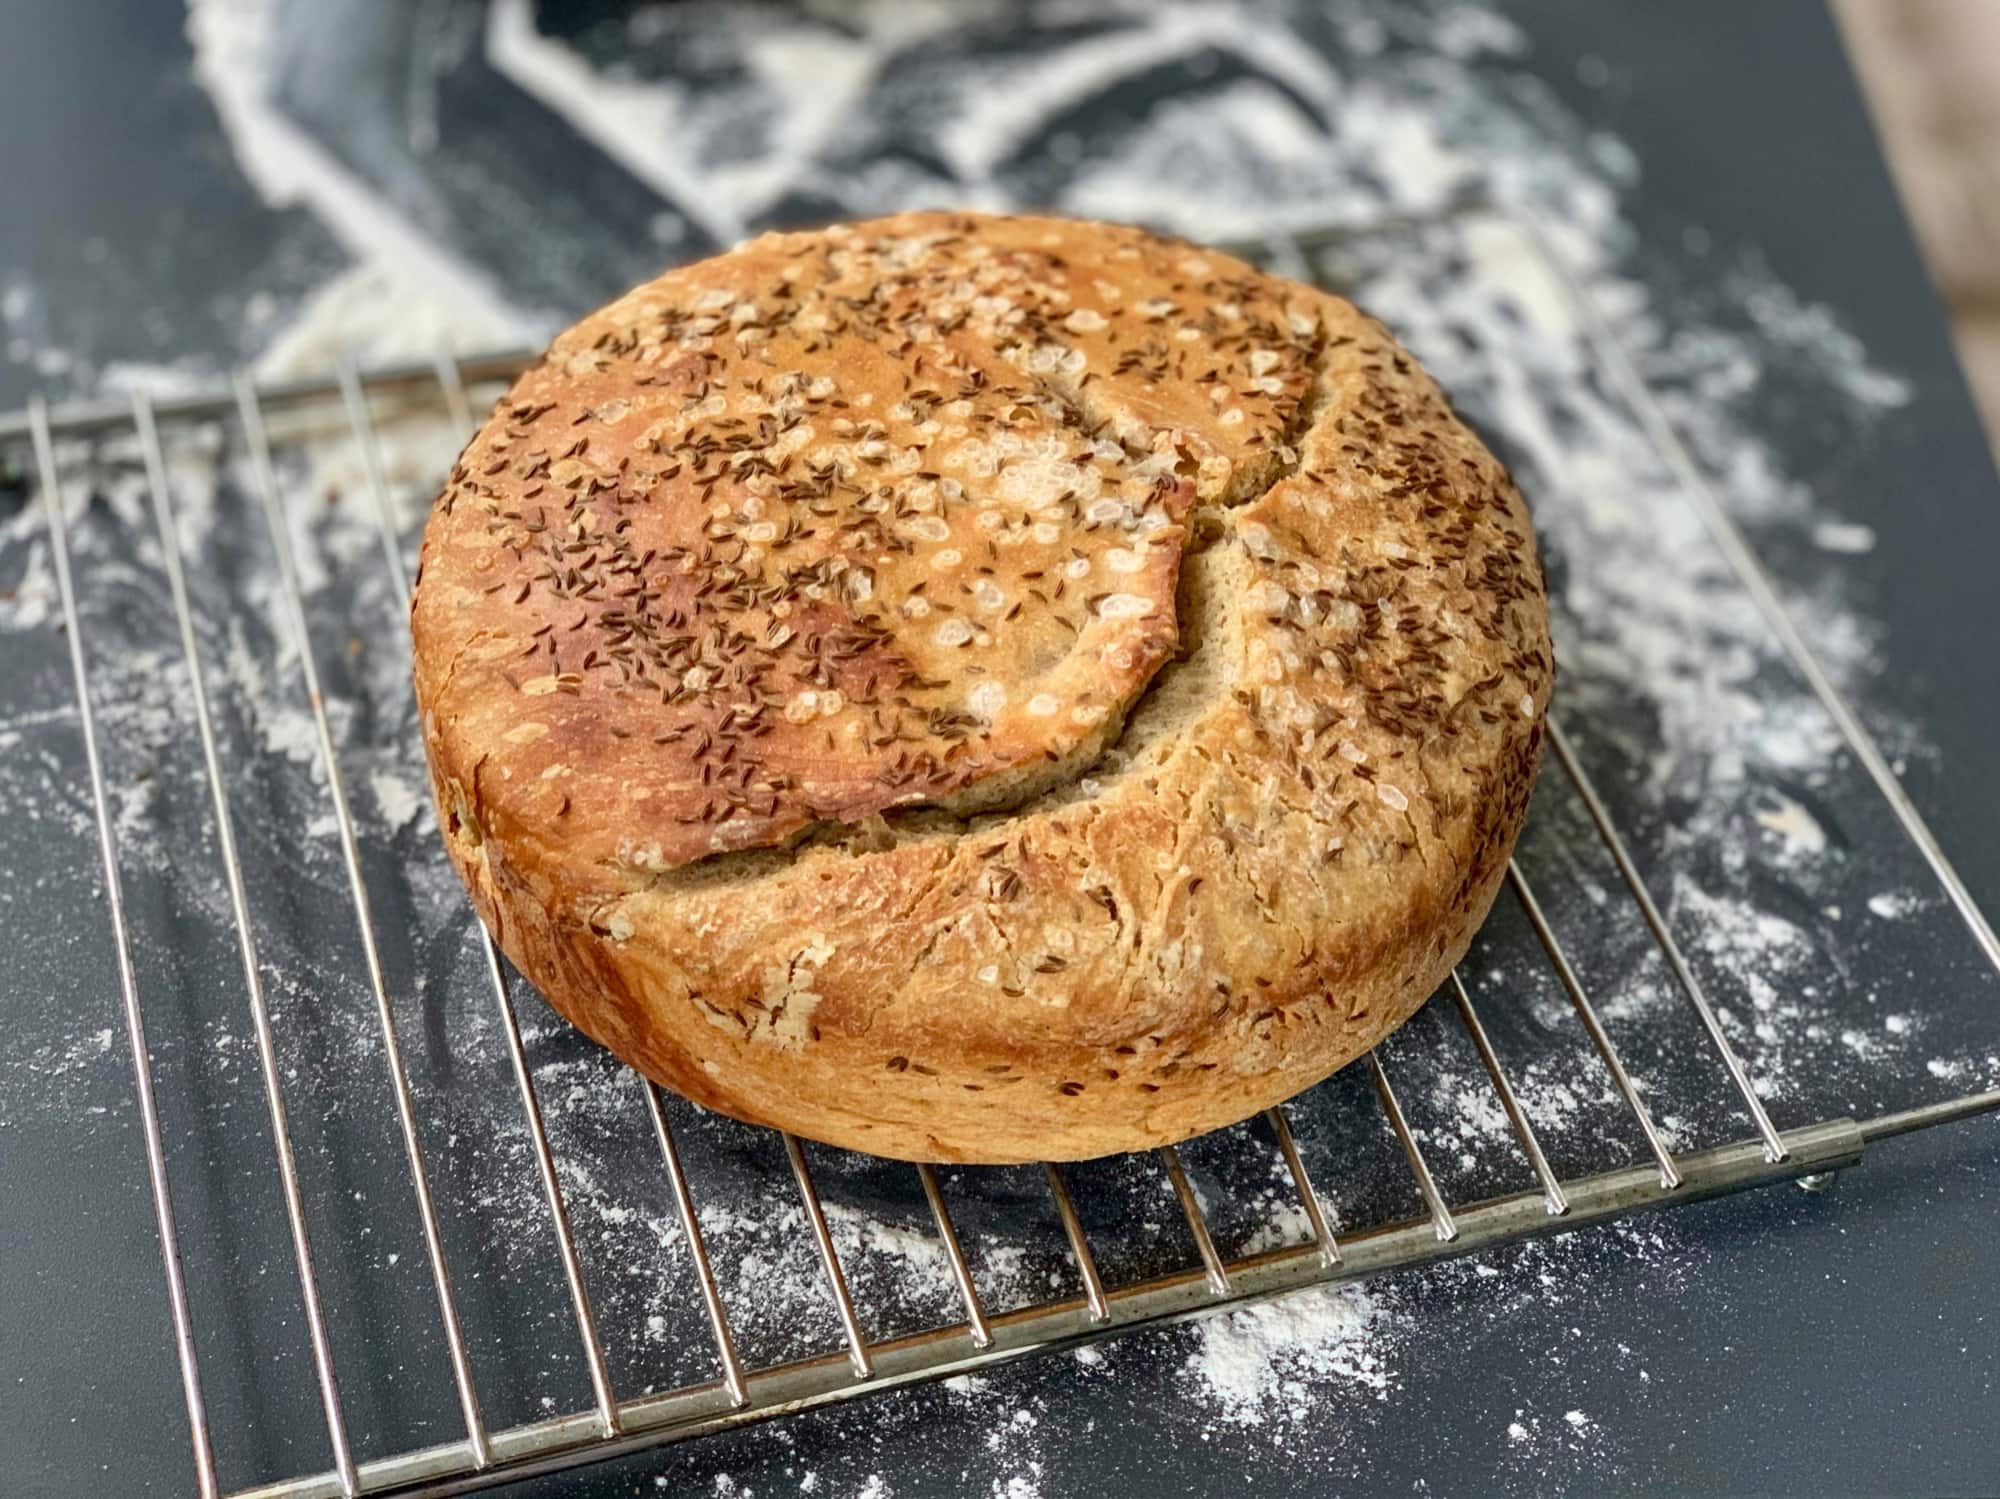 Maybe it's time to learn to bake bread?